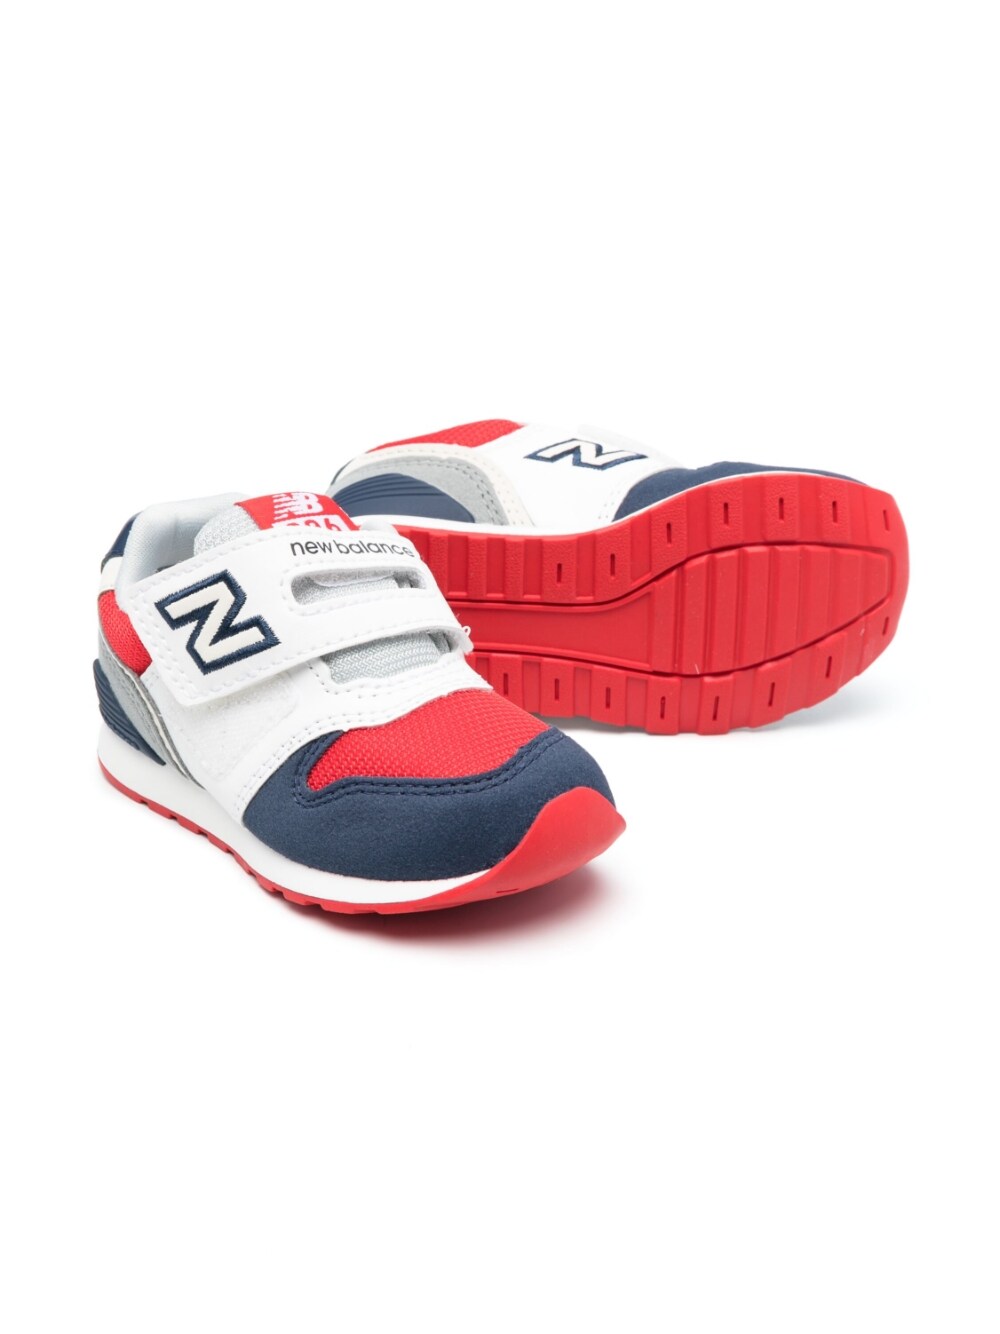 Multicolored 886 low-top sneakers - kids - NEW BALANCE KIDS ...